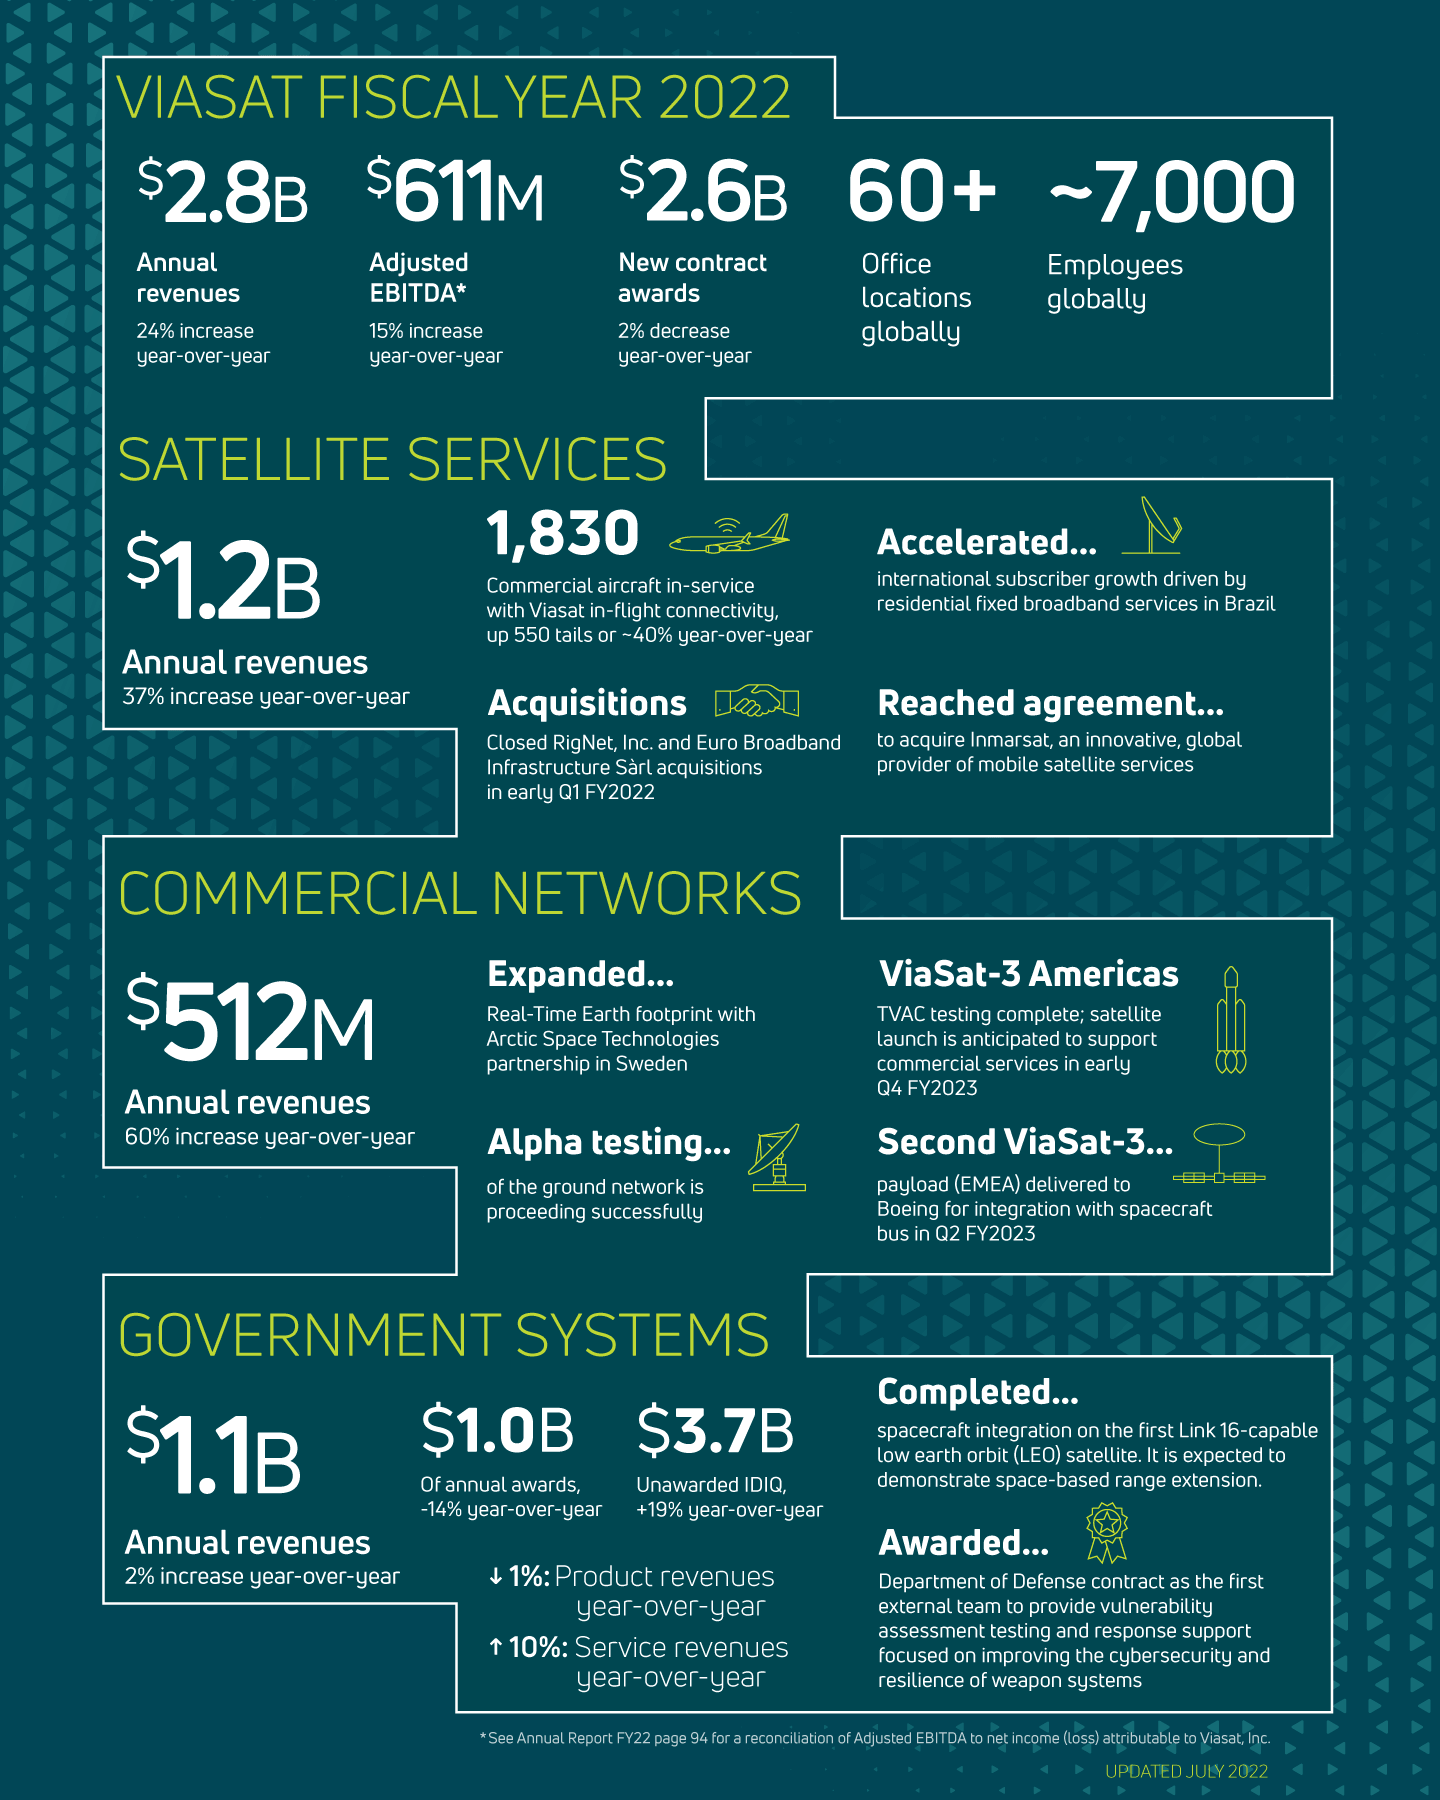 Viasat fiscal year 2021 highlights including financials, contract awards, customer counts, honors, product revenues and more.